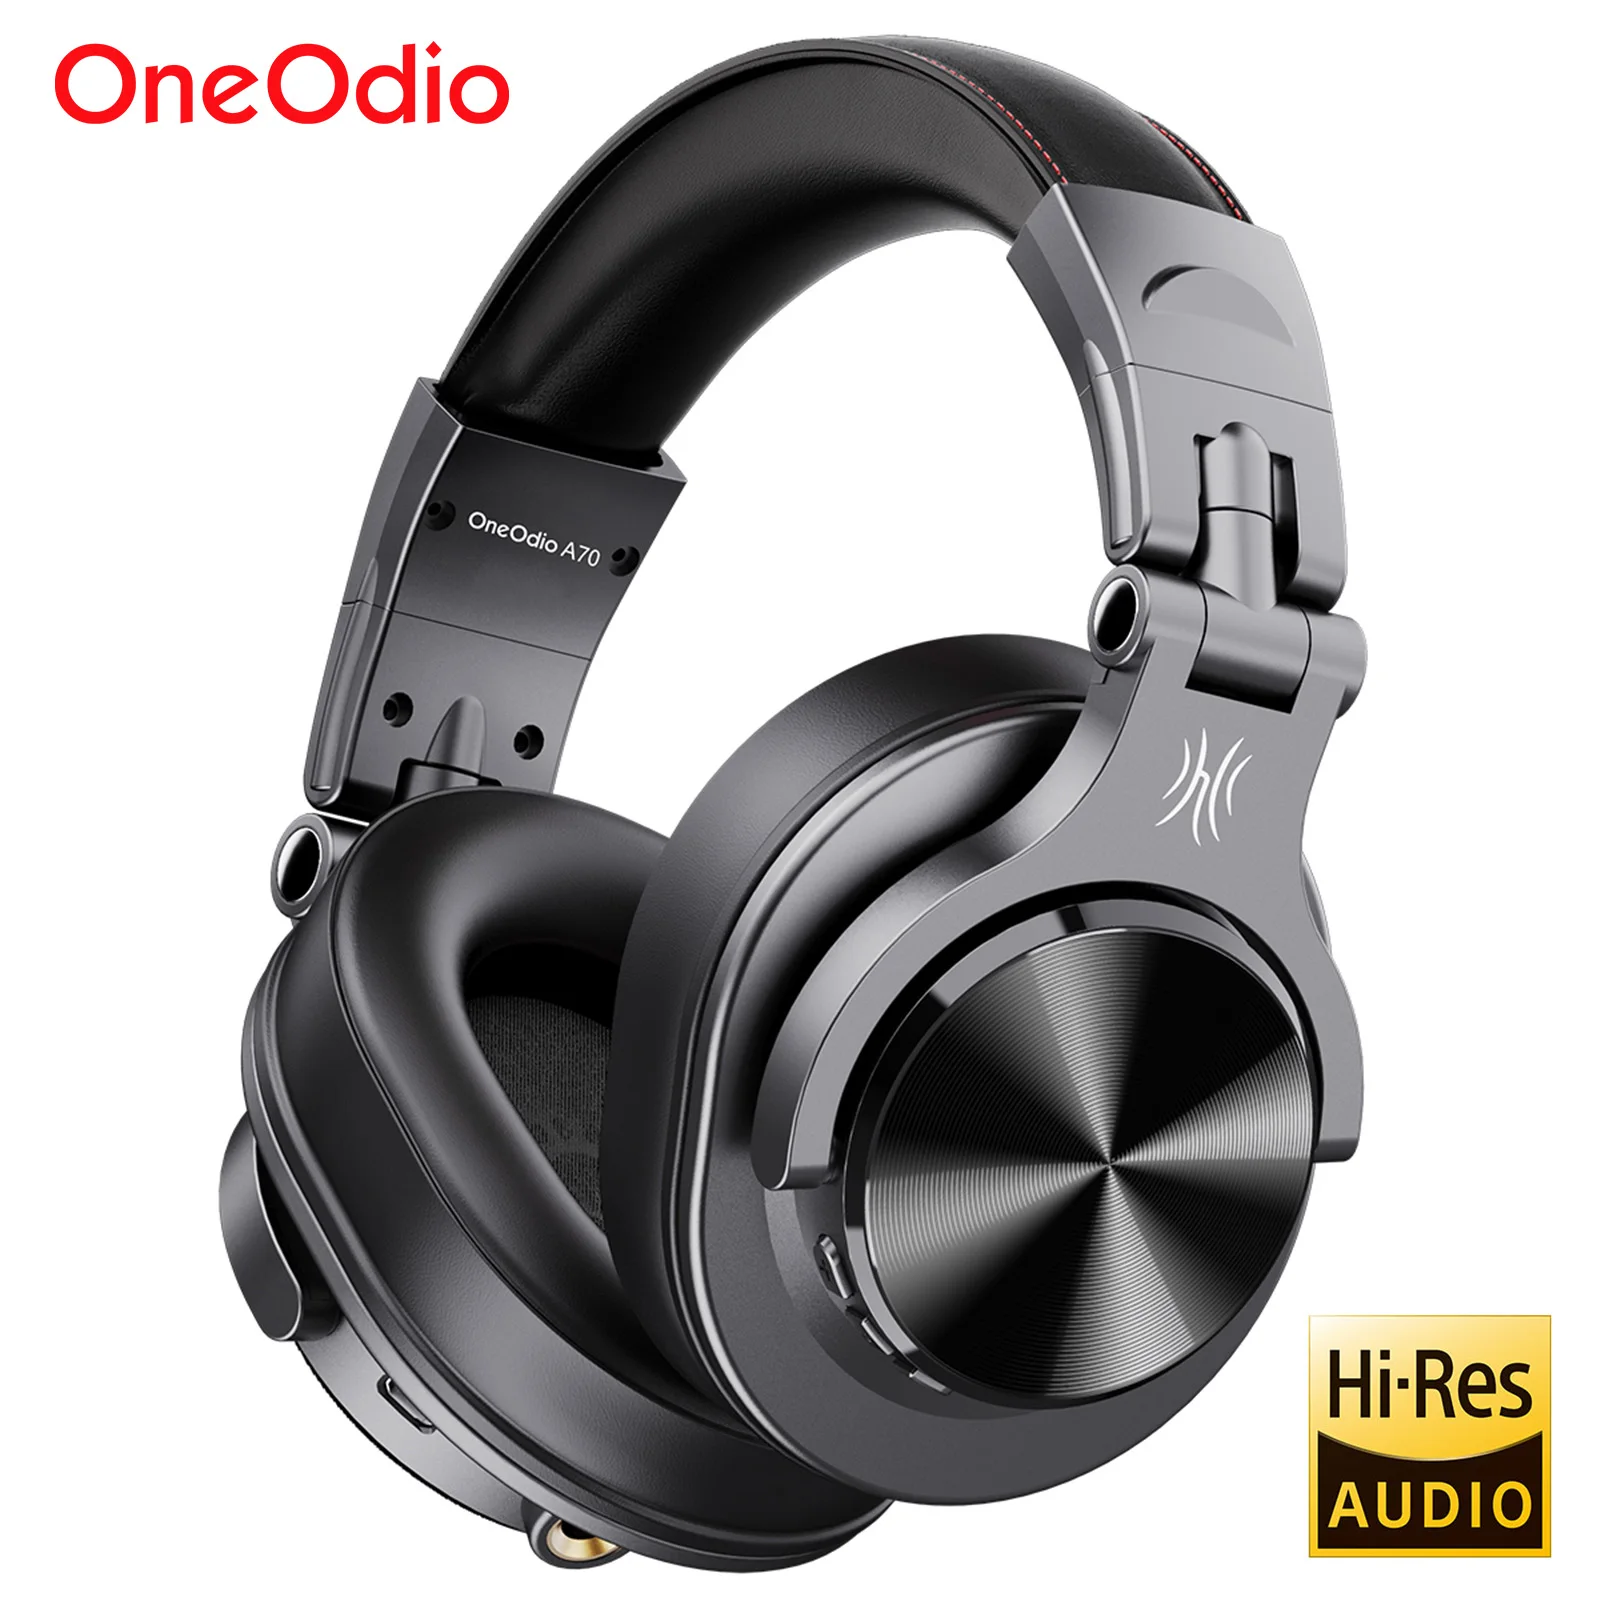 OneOdio a70 Bluetooth Over-Ear Headphones Review: Wonderful